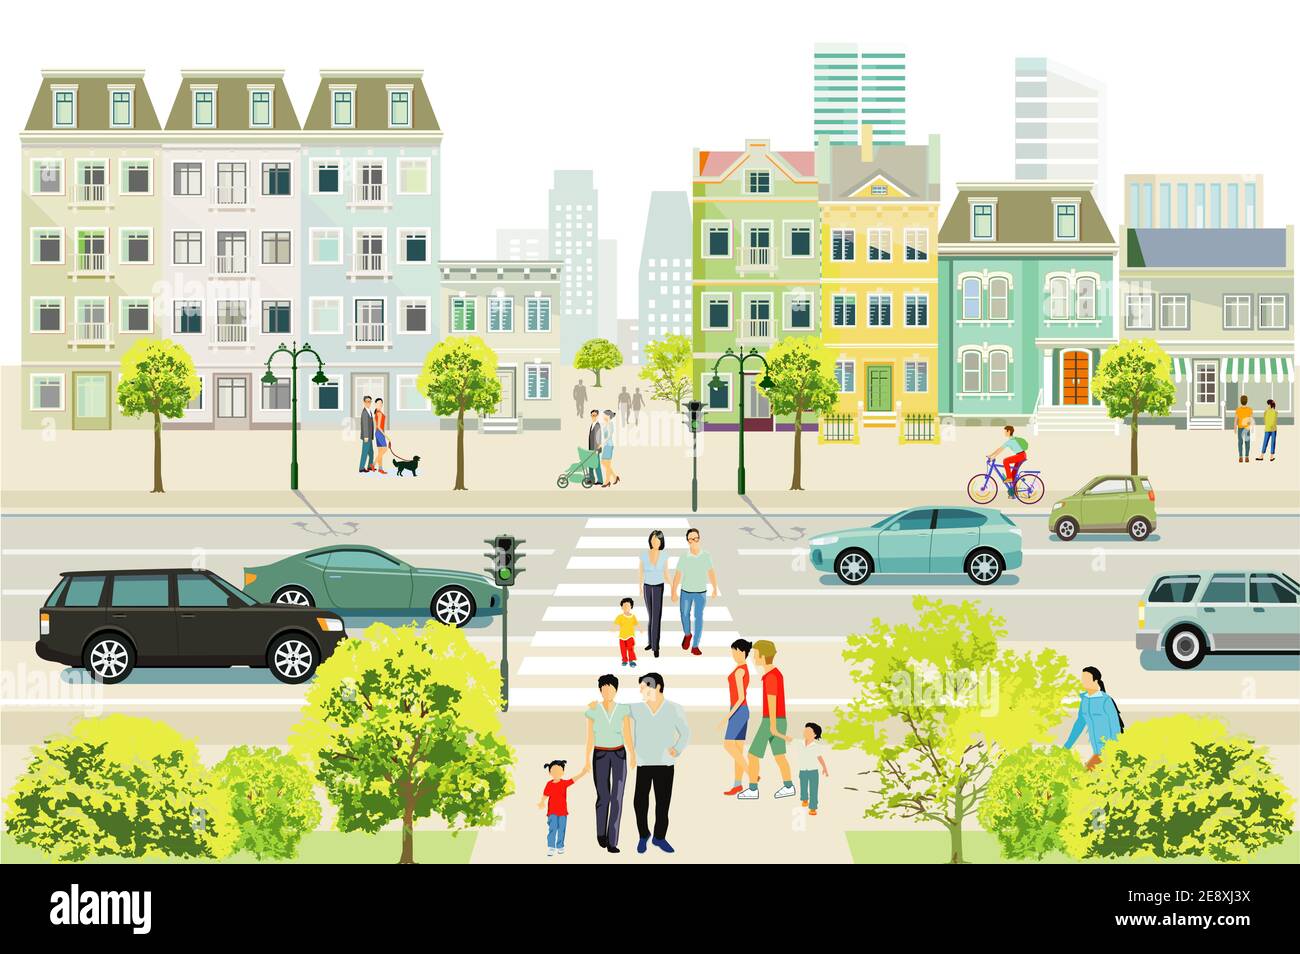 Road traffic with families and people on the sidewalk illustration Stock Vector